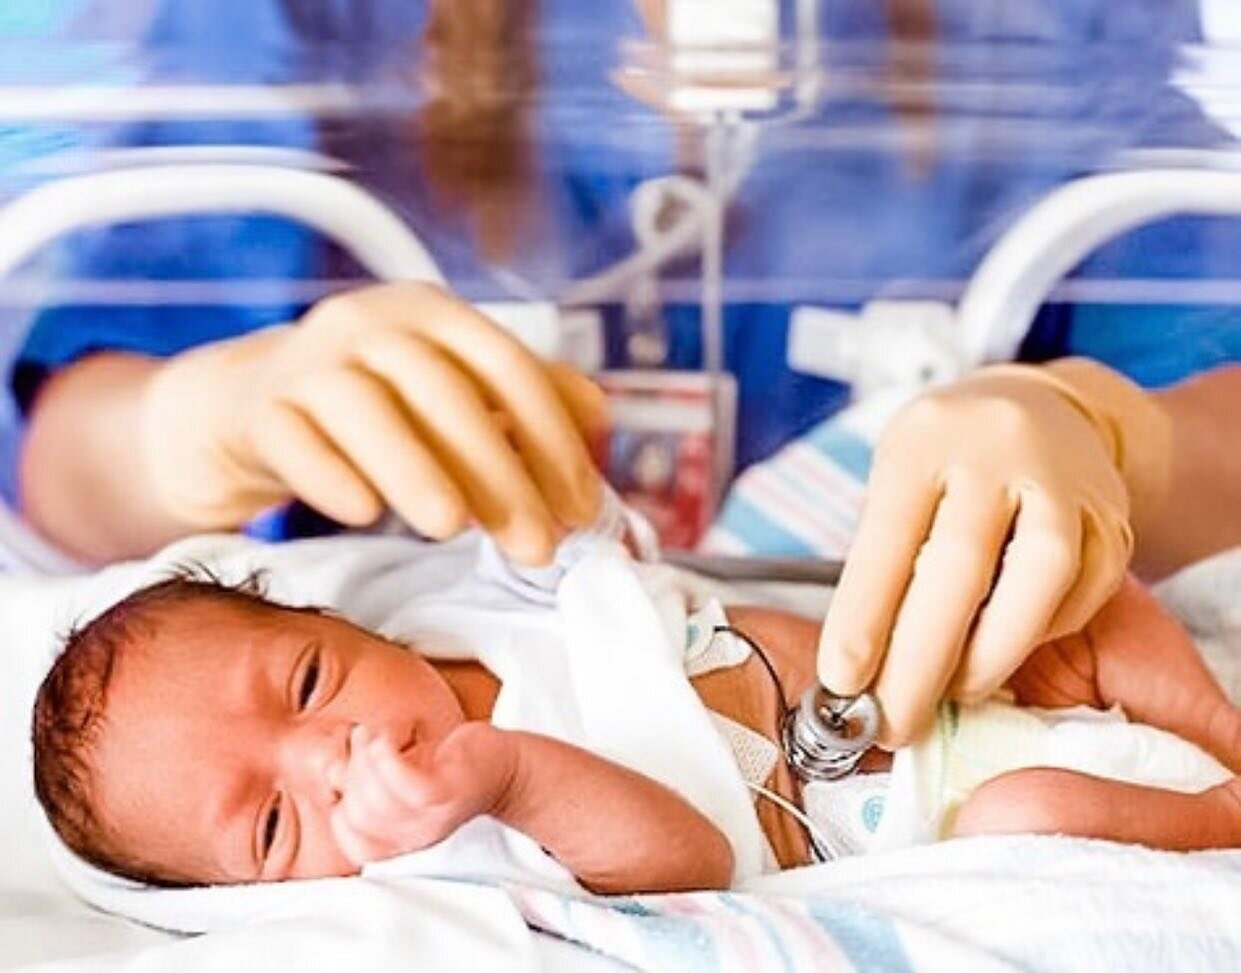 ✨ PROS &amp; CONS OF NICU NURSING ✨

The job of a NICU nurse is so rewarding and unlike any other. You get to help families through quite possibly the hardest time in their lives and witness the progress and growth from start to finish of not just th